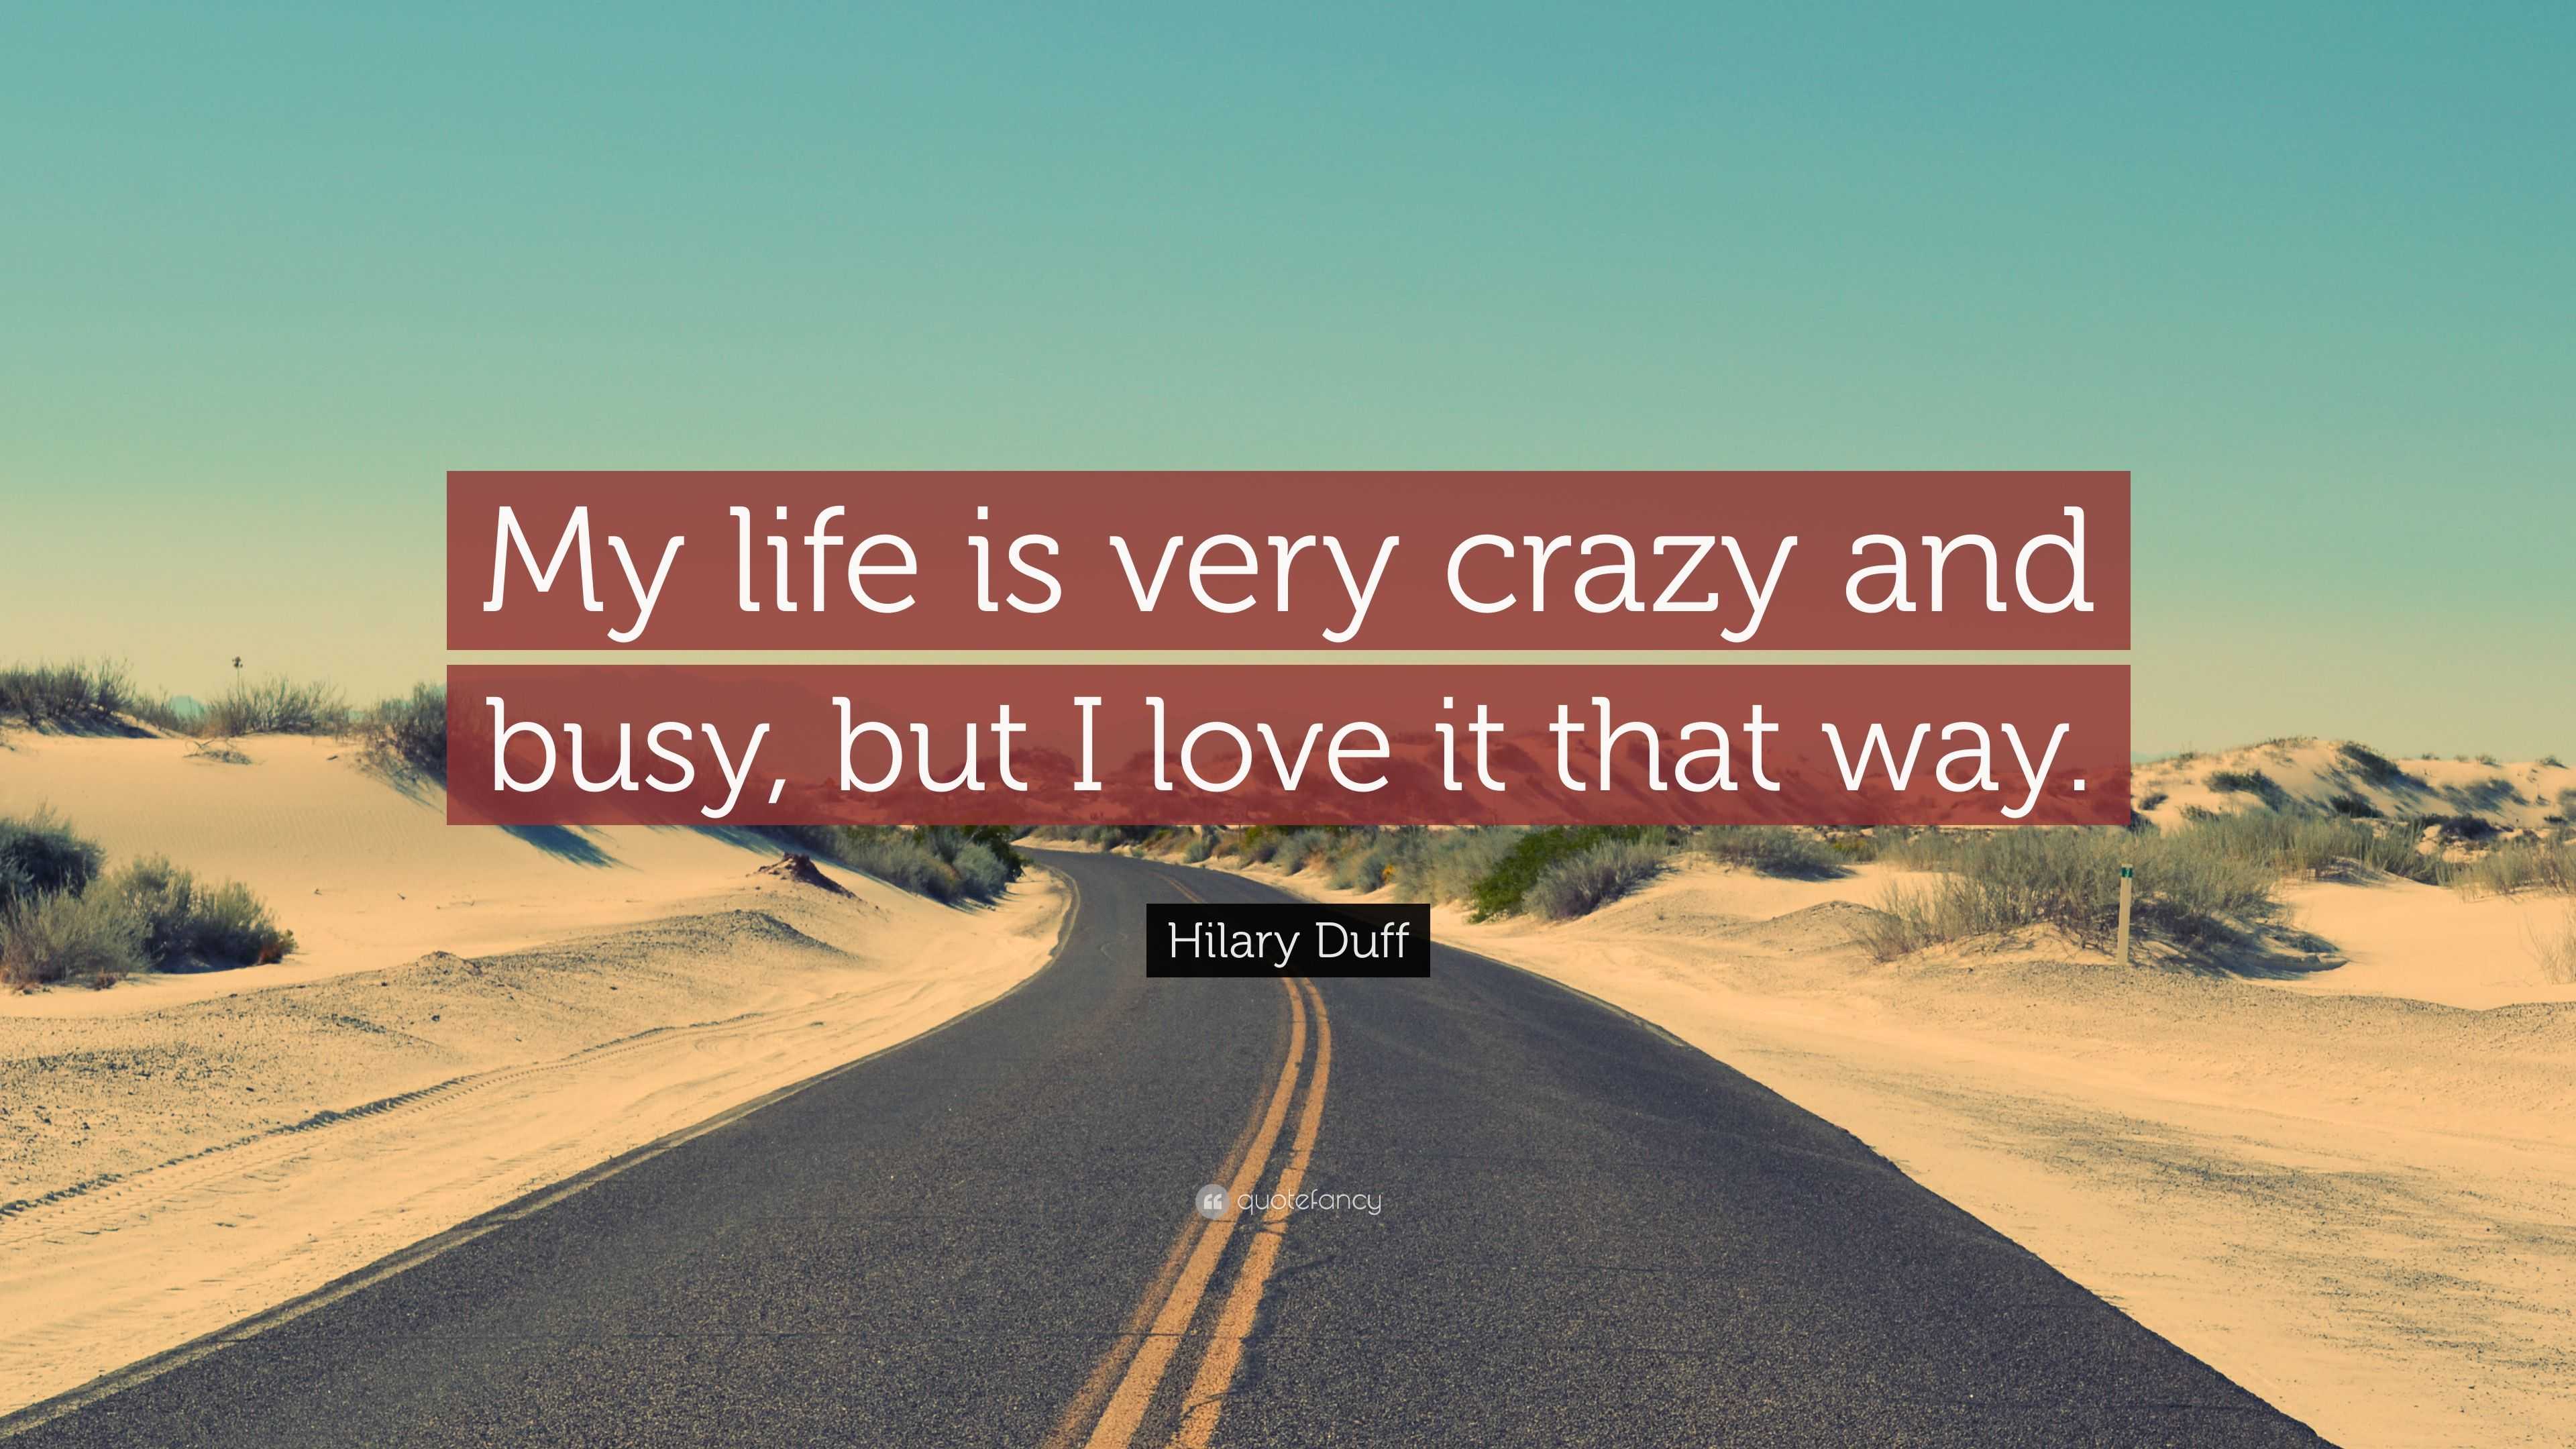 busy quotes for love